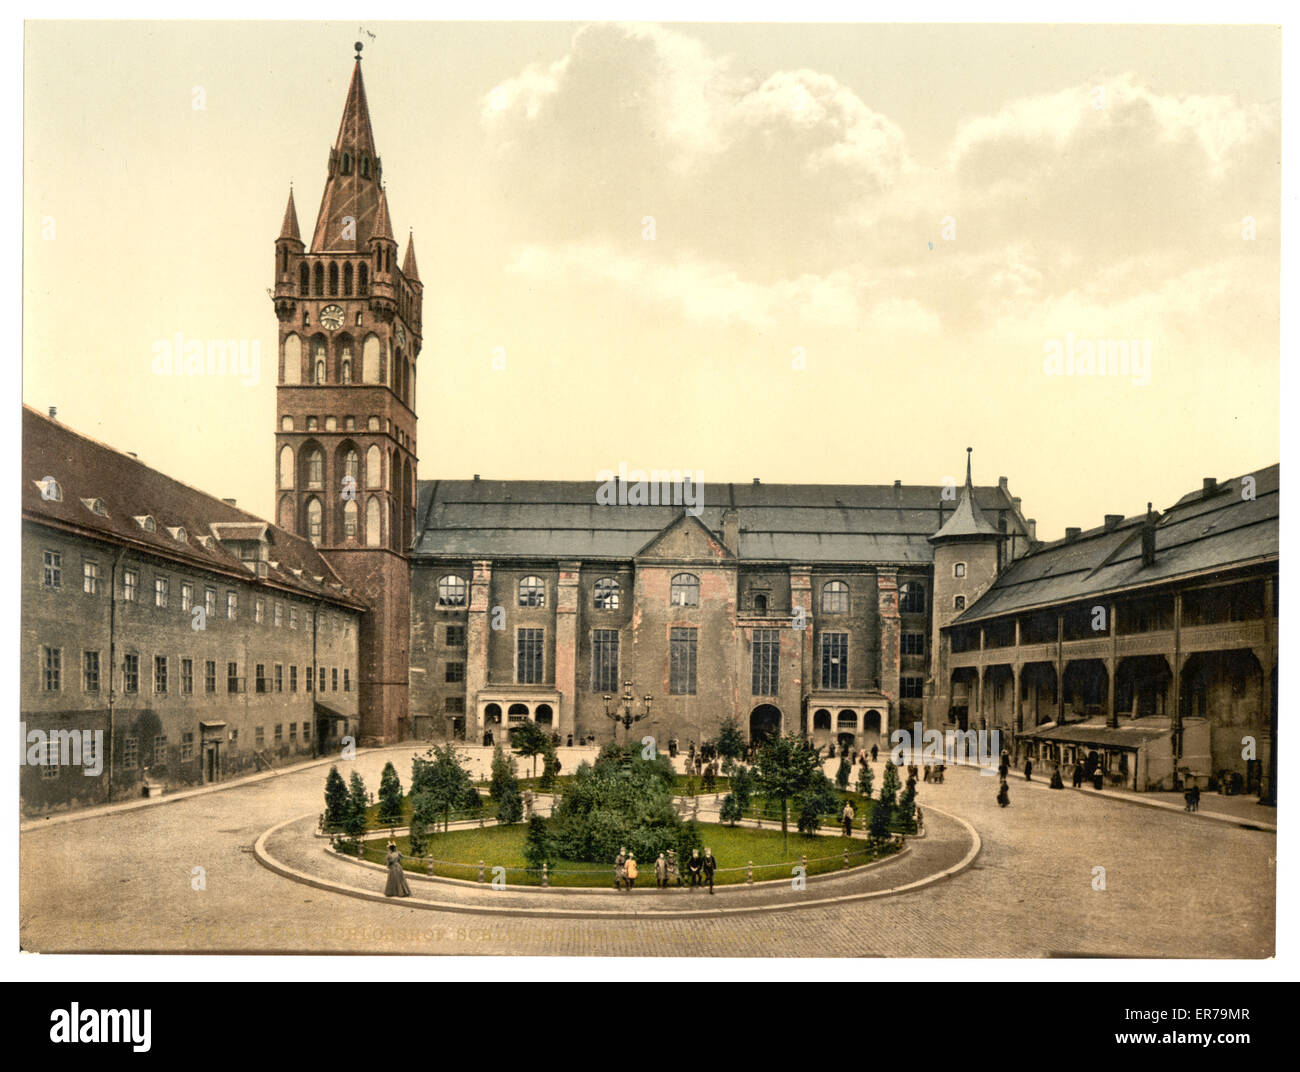 Court and church of the castle and the criminal tribunal, Konigsberg, East Prussia, Germany (i.e., Kaliningrad, Russia). Date between ca. 1890 and ca. 1900. Stock Photo